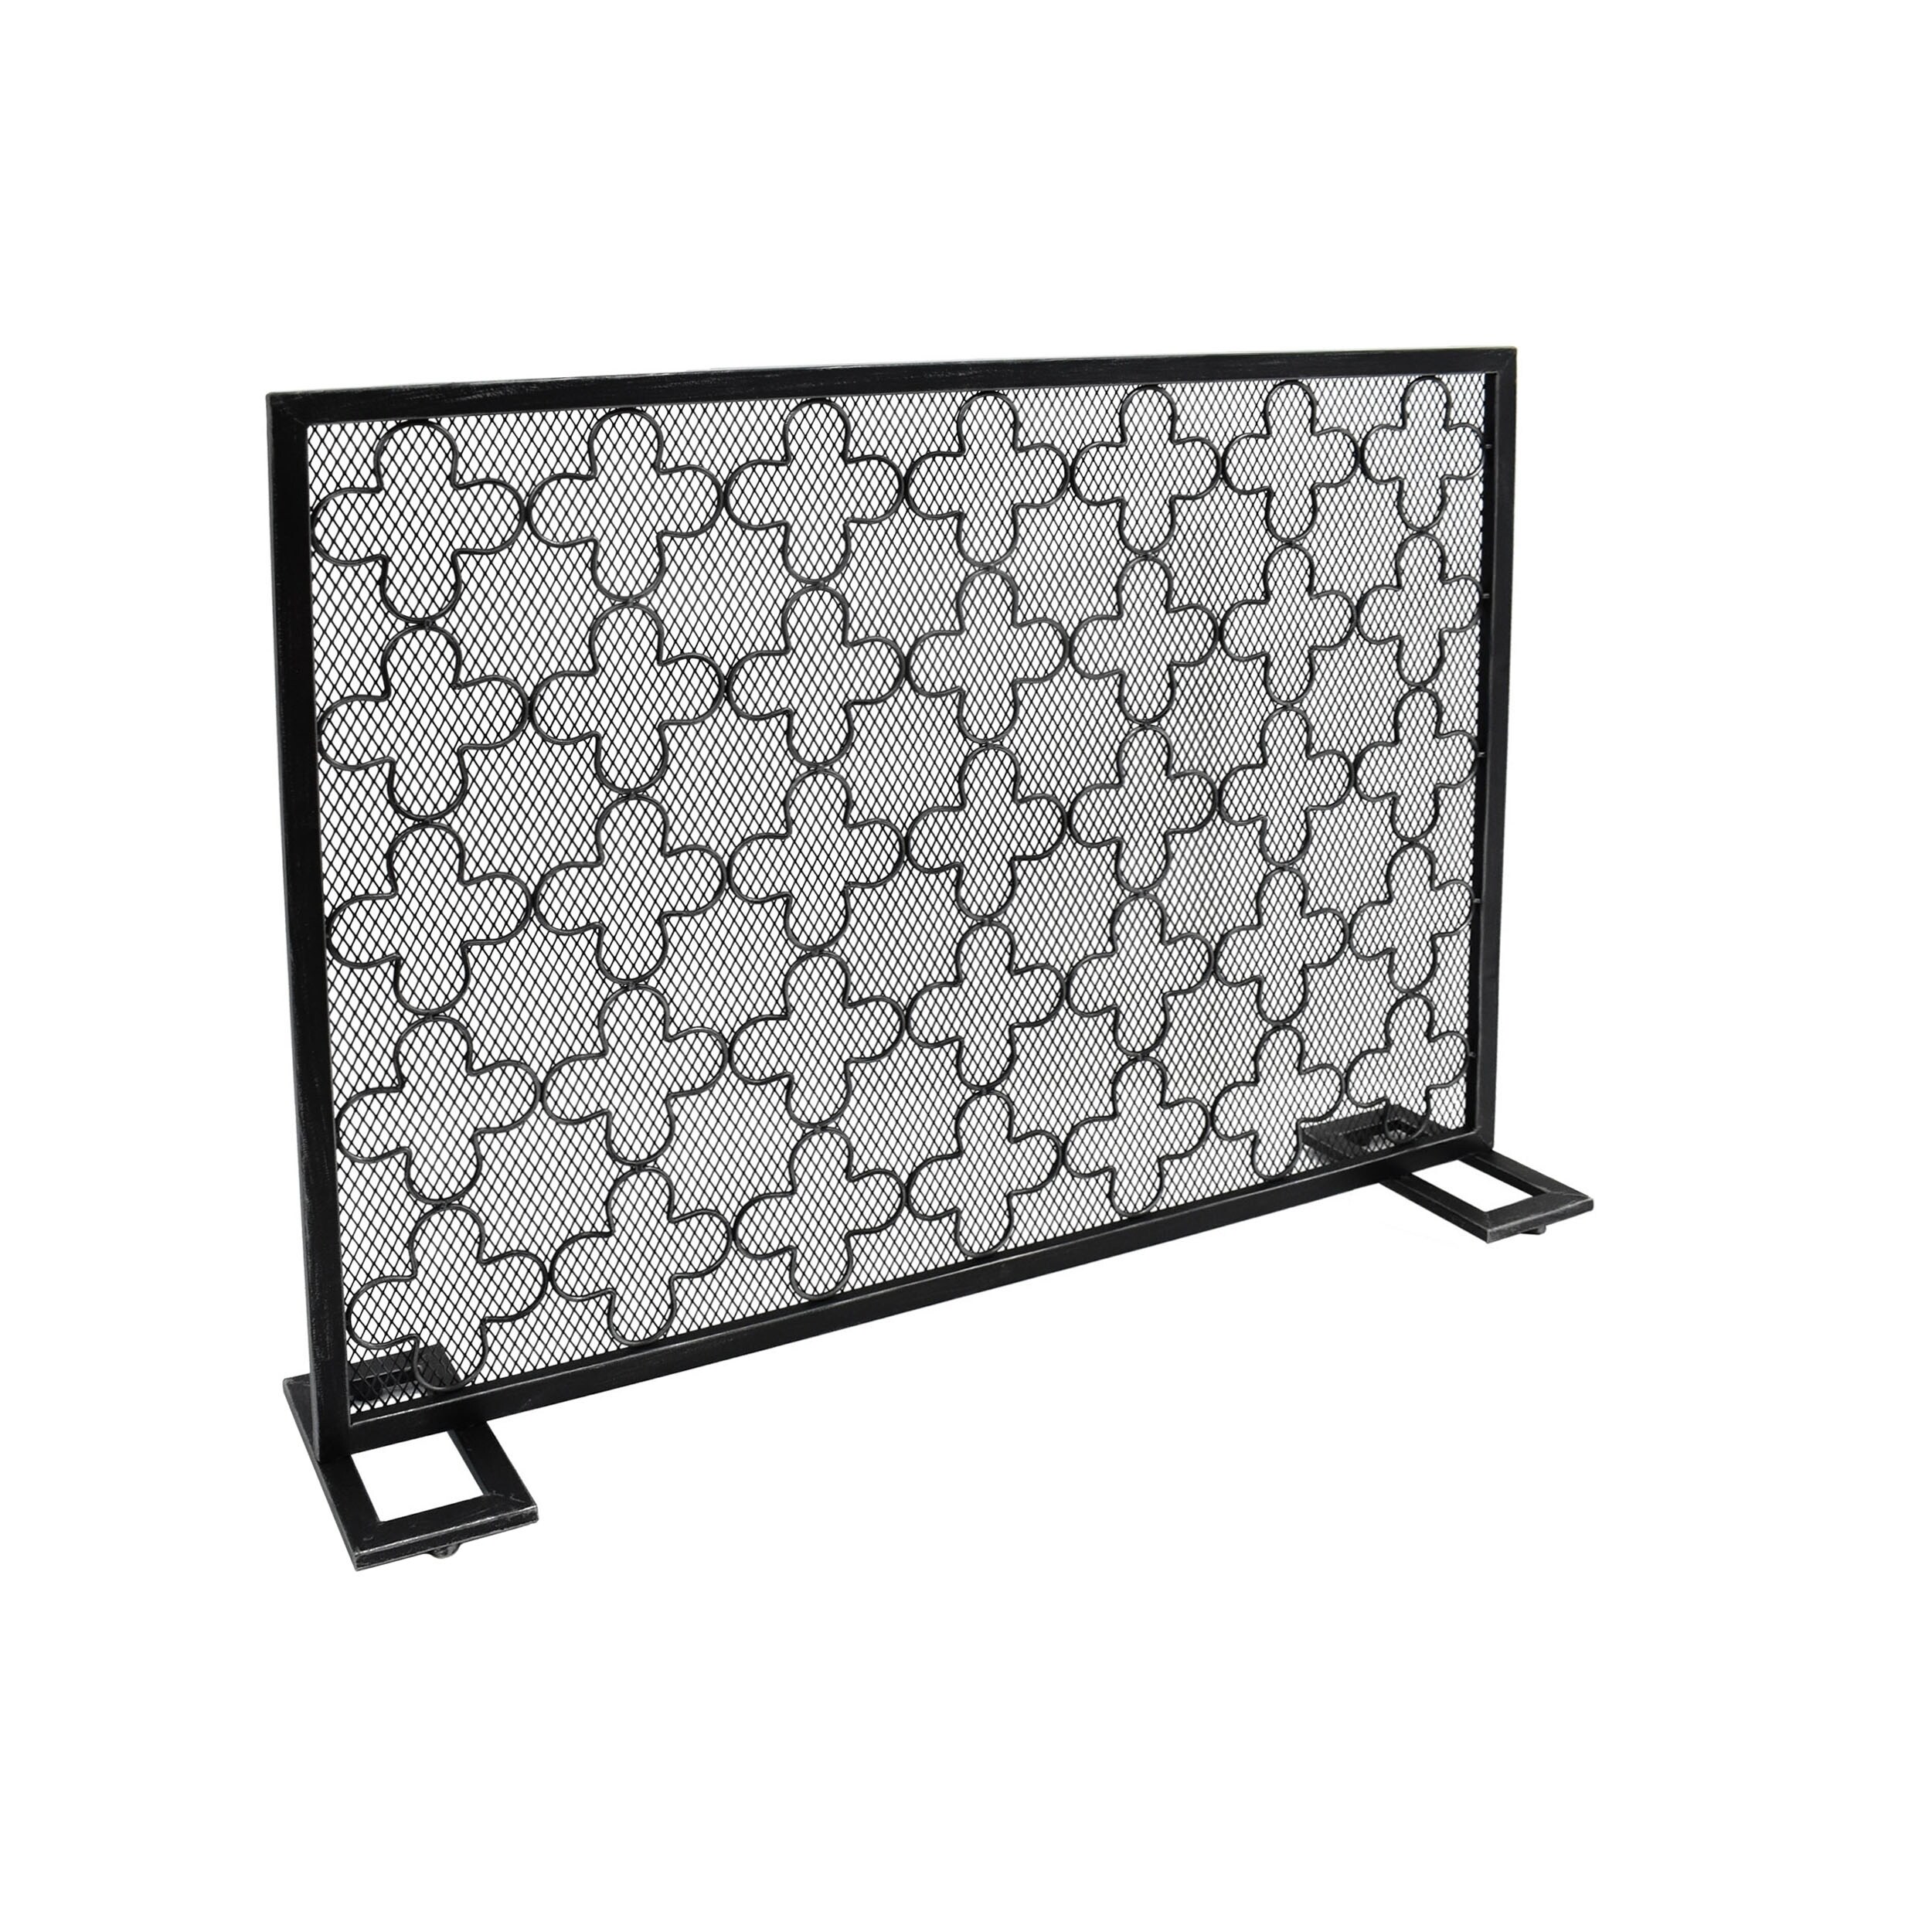 Christopher Knight Home Alleghany Modern Single Panel Fireplace Screen by Black Brushed Gold Finish